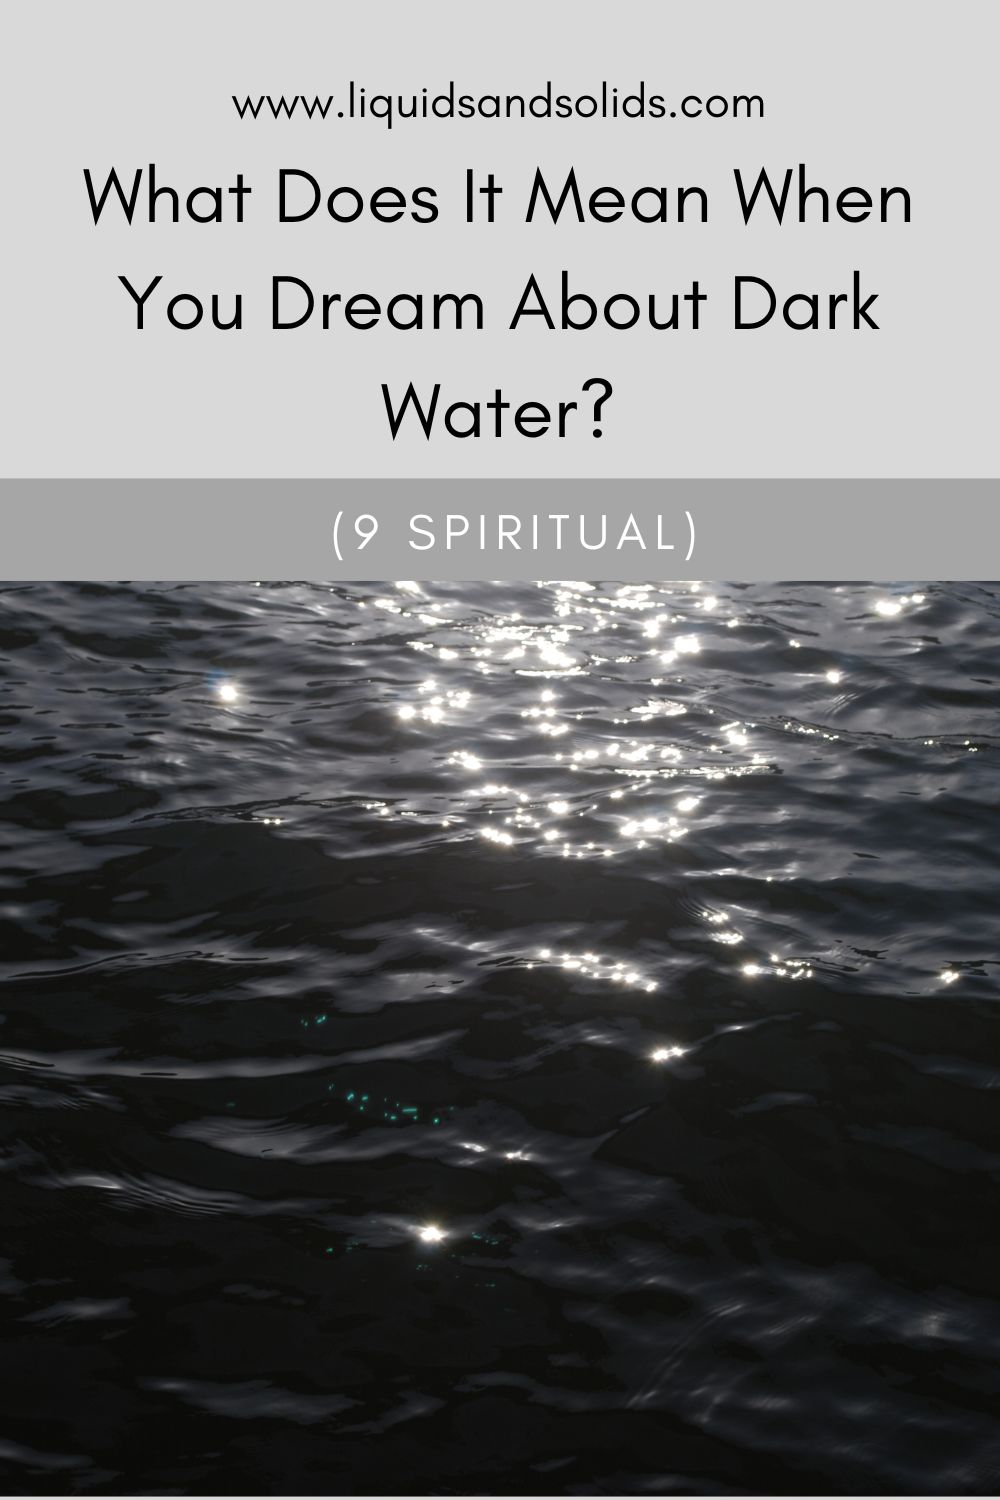 What Does It Mean To Dream Of Dark Water?